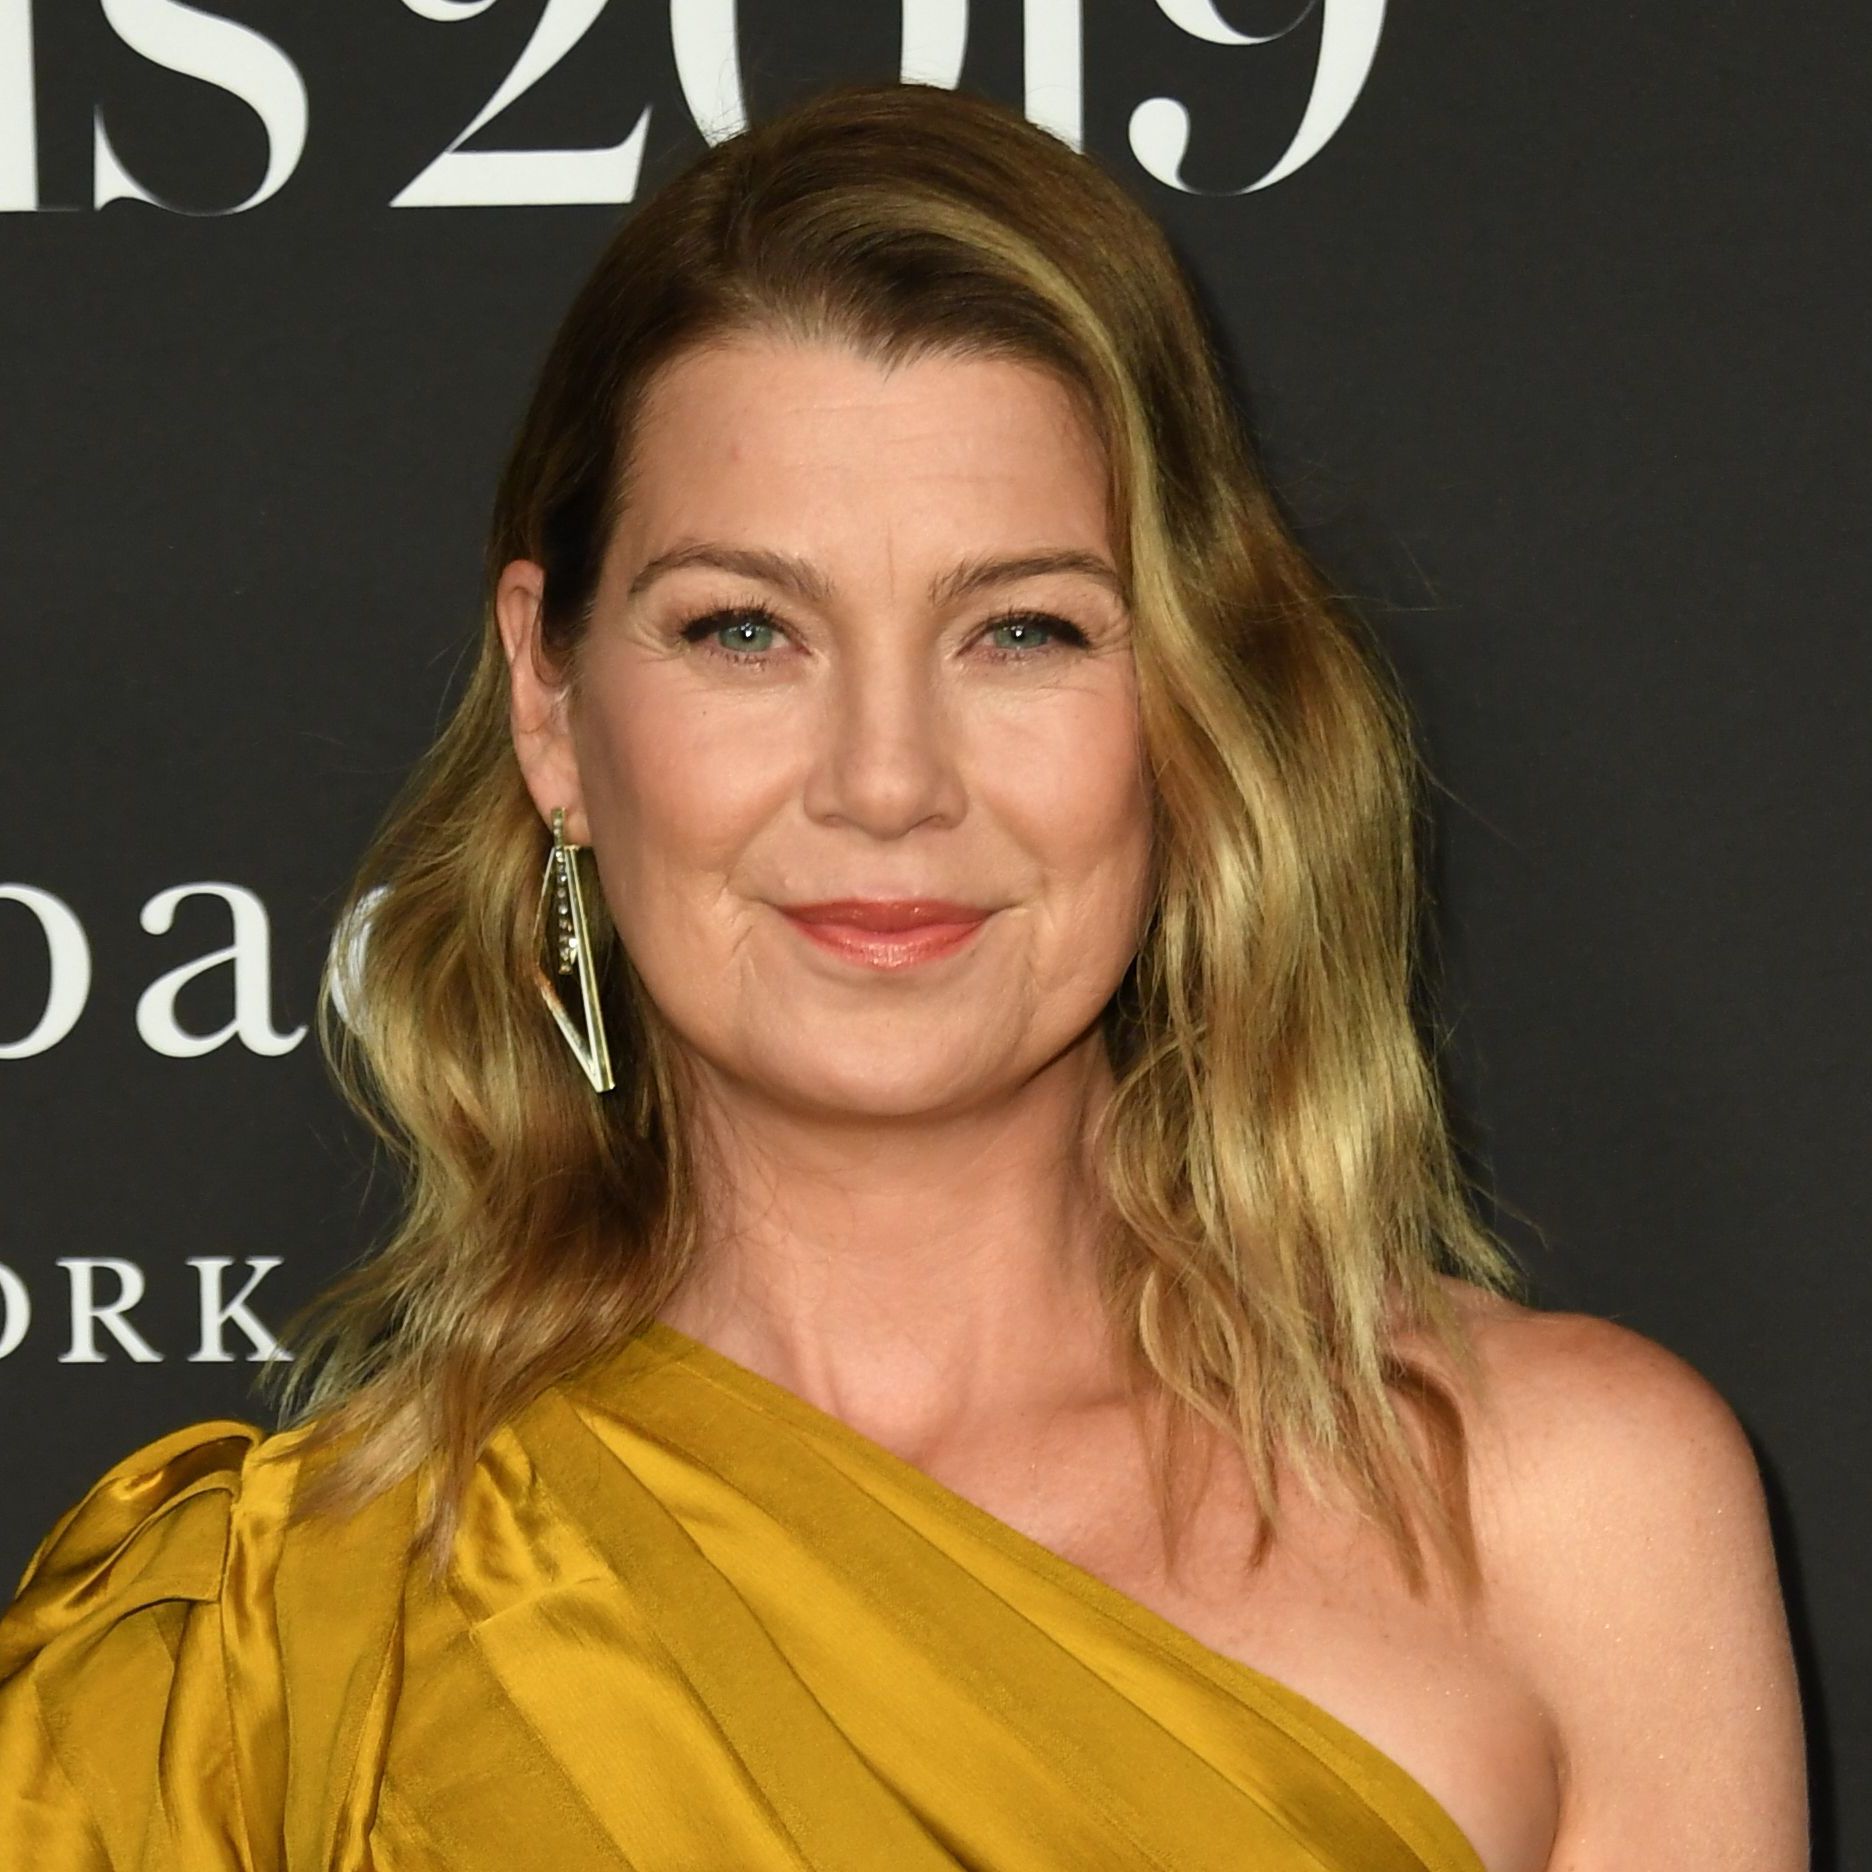 Why Ellen Pompeo Won't Have a Main Role on ‘Grey’s Anatomy’ This Season